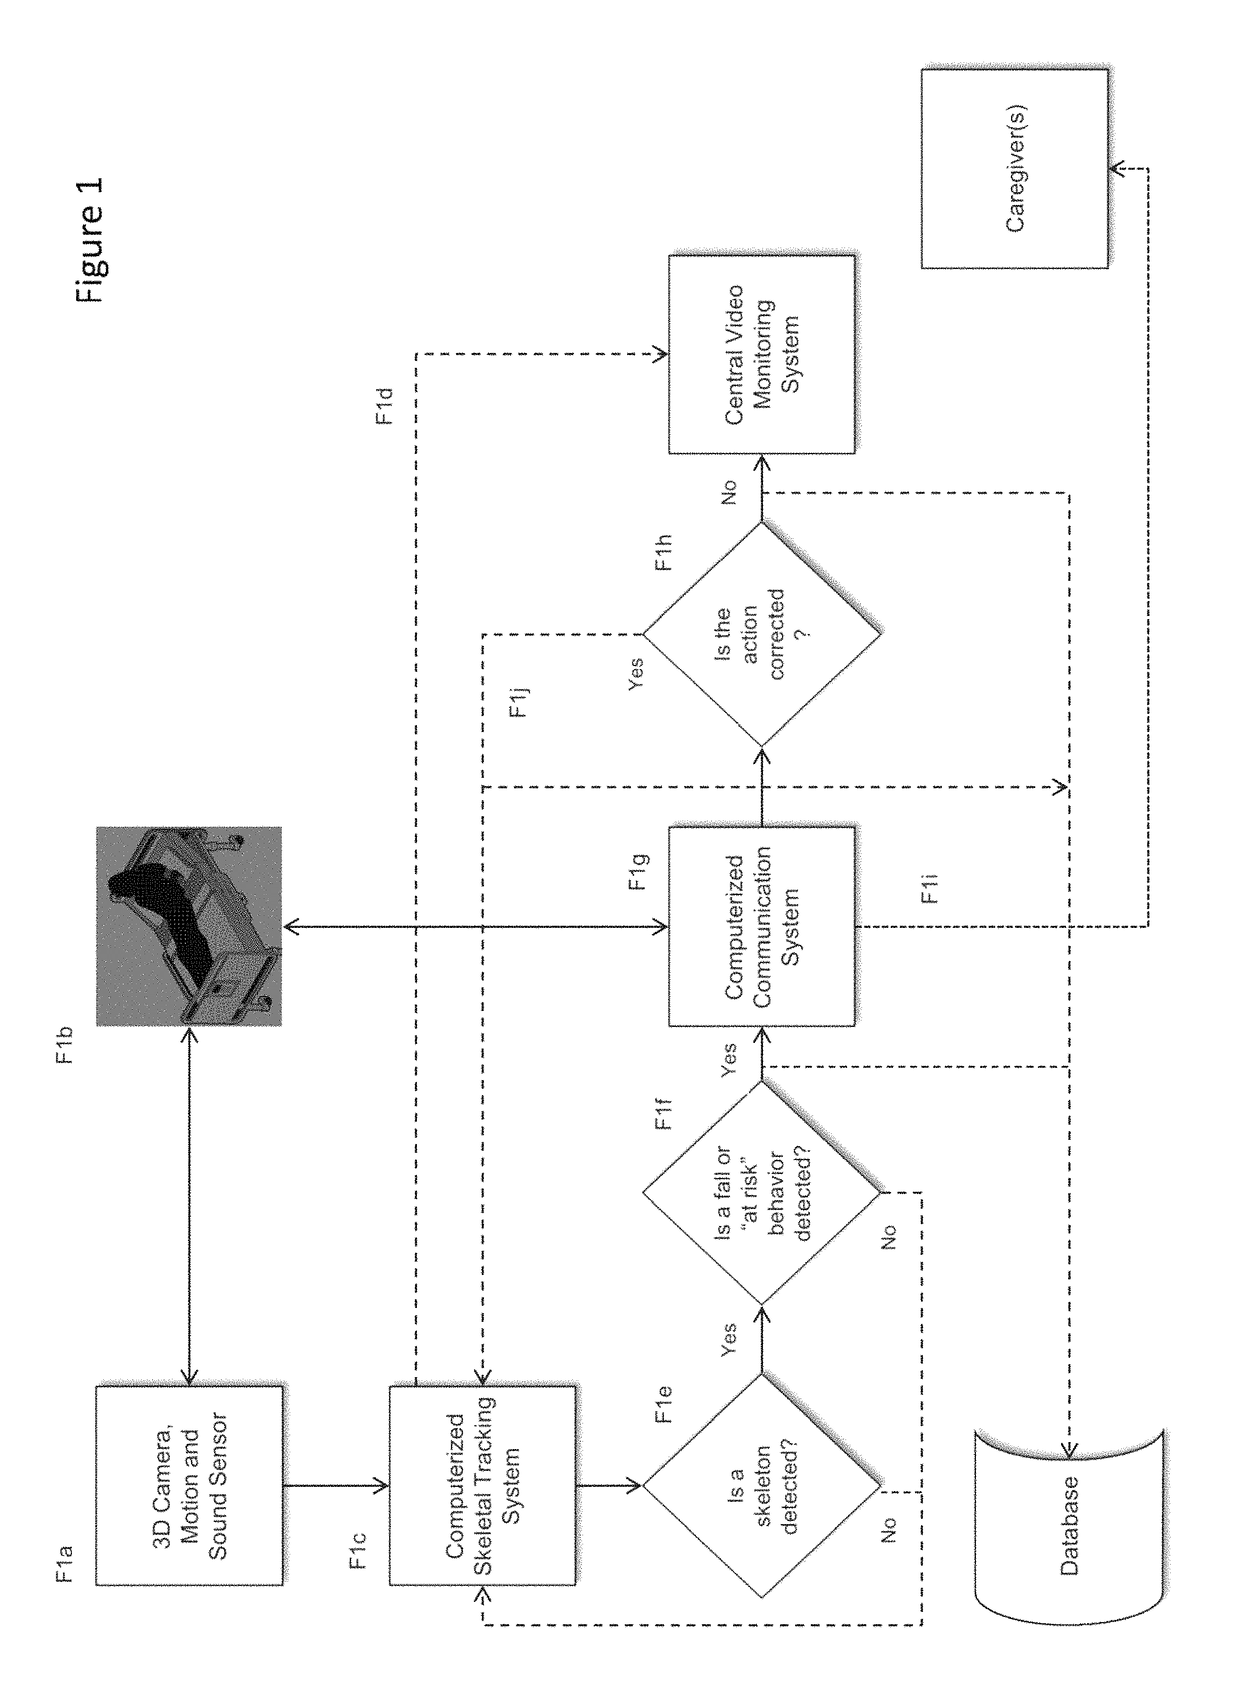 Method for determining whether an individual enters a prescribed virtual zone using skeletal tracking and 3D blob detection